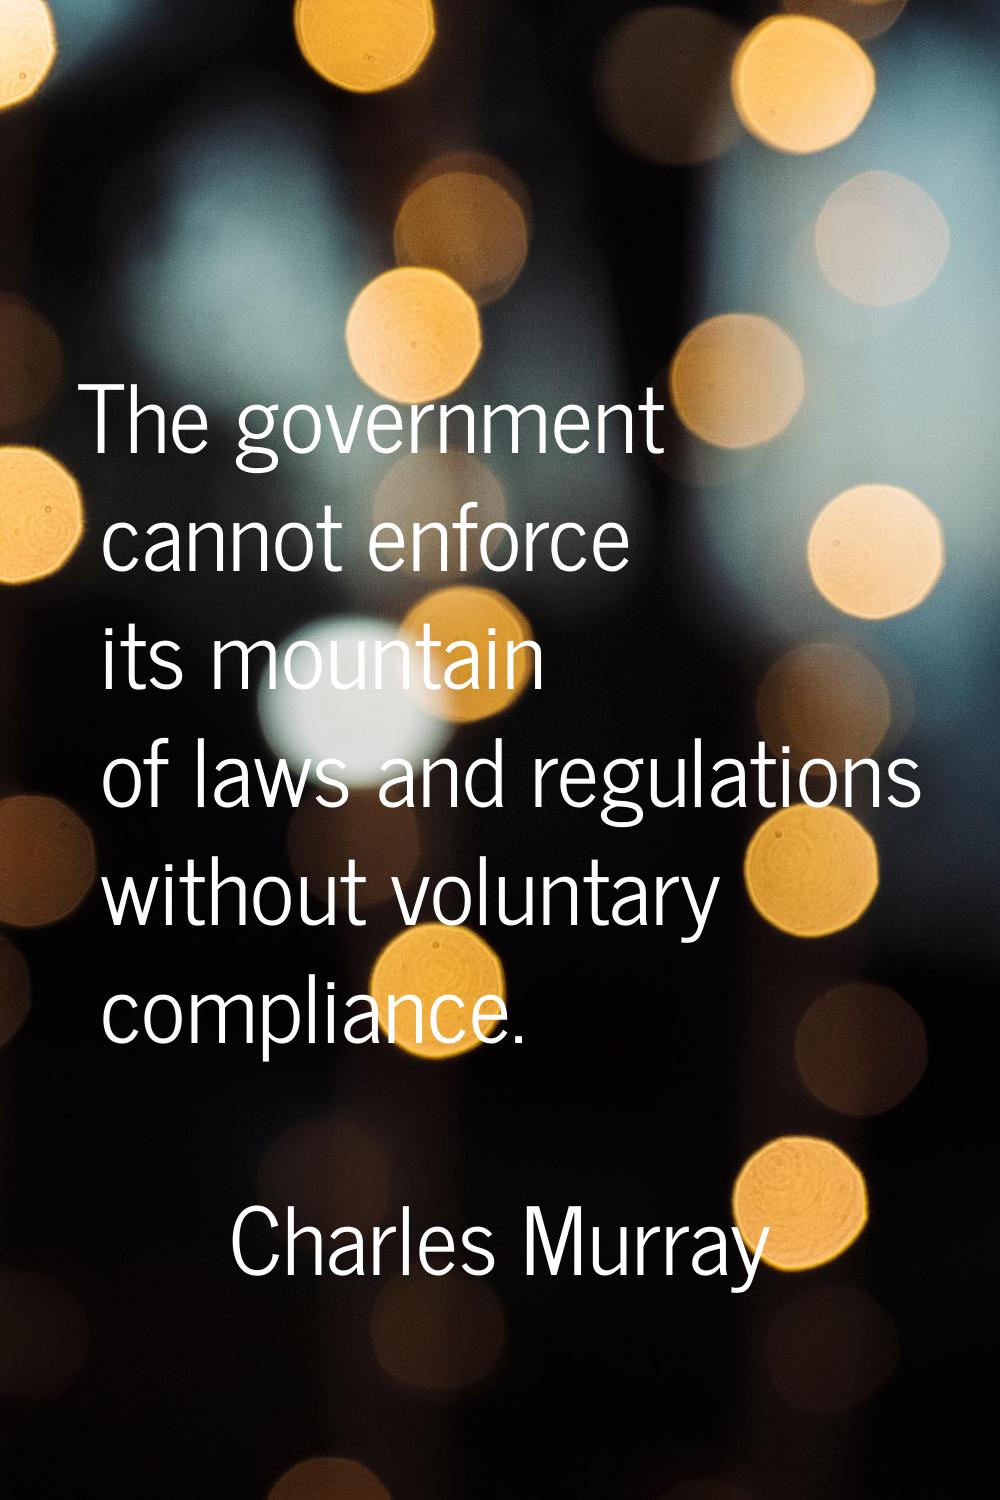 The government cannot enforce its mountain of laws and regulations without voluntary compliance.